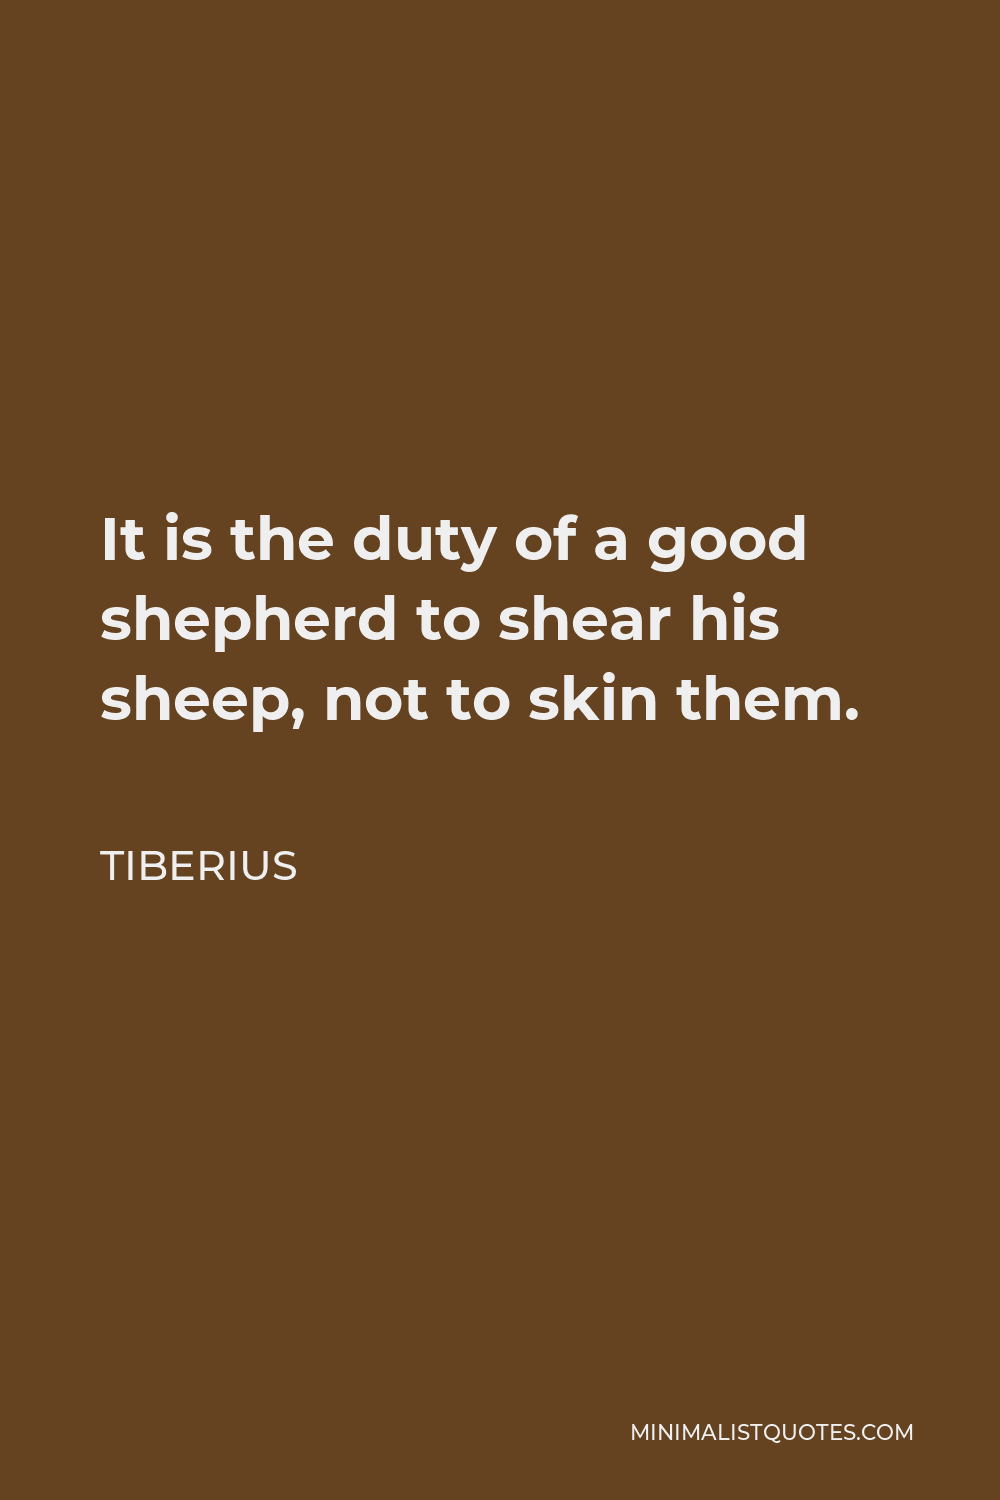 Tiberius Quote - It is the duty of a good shepherd to shear his sheep, not to skin them.